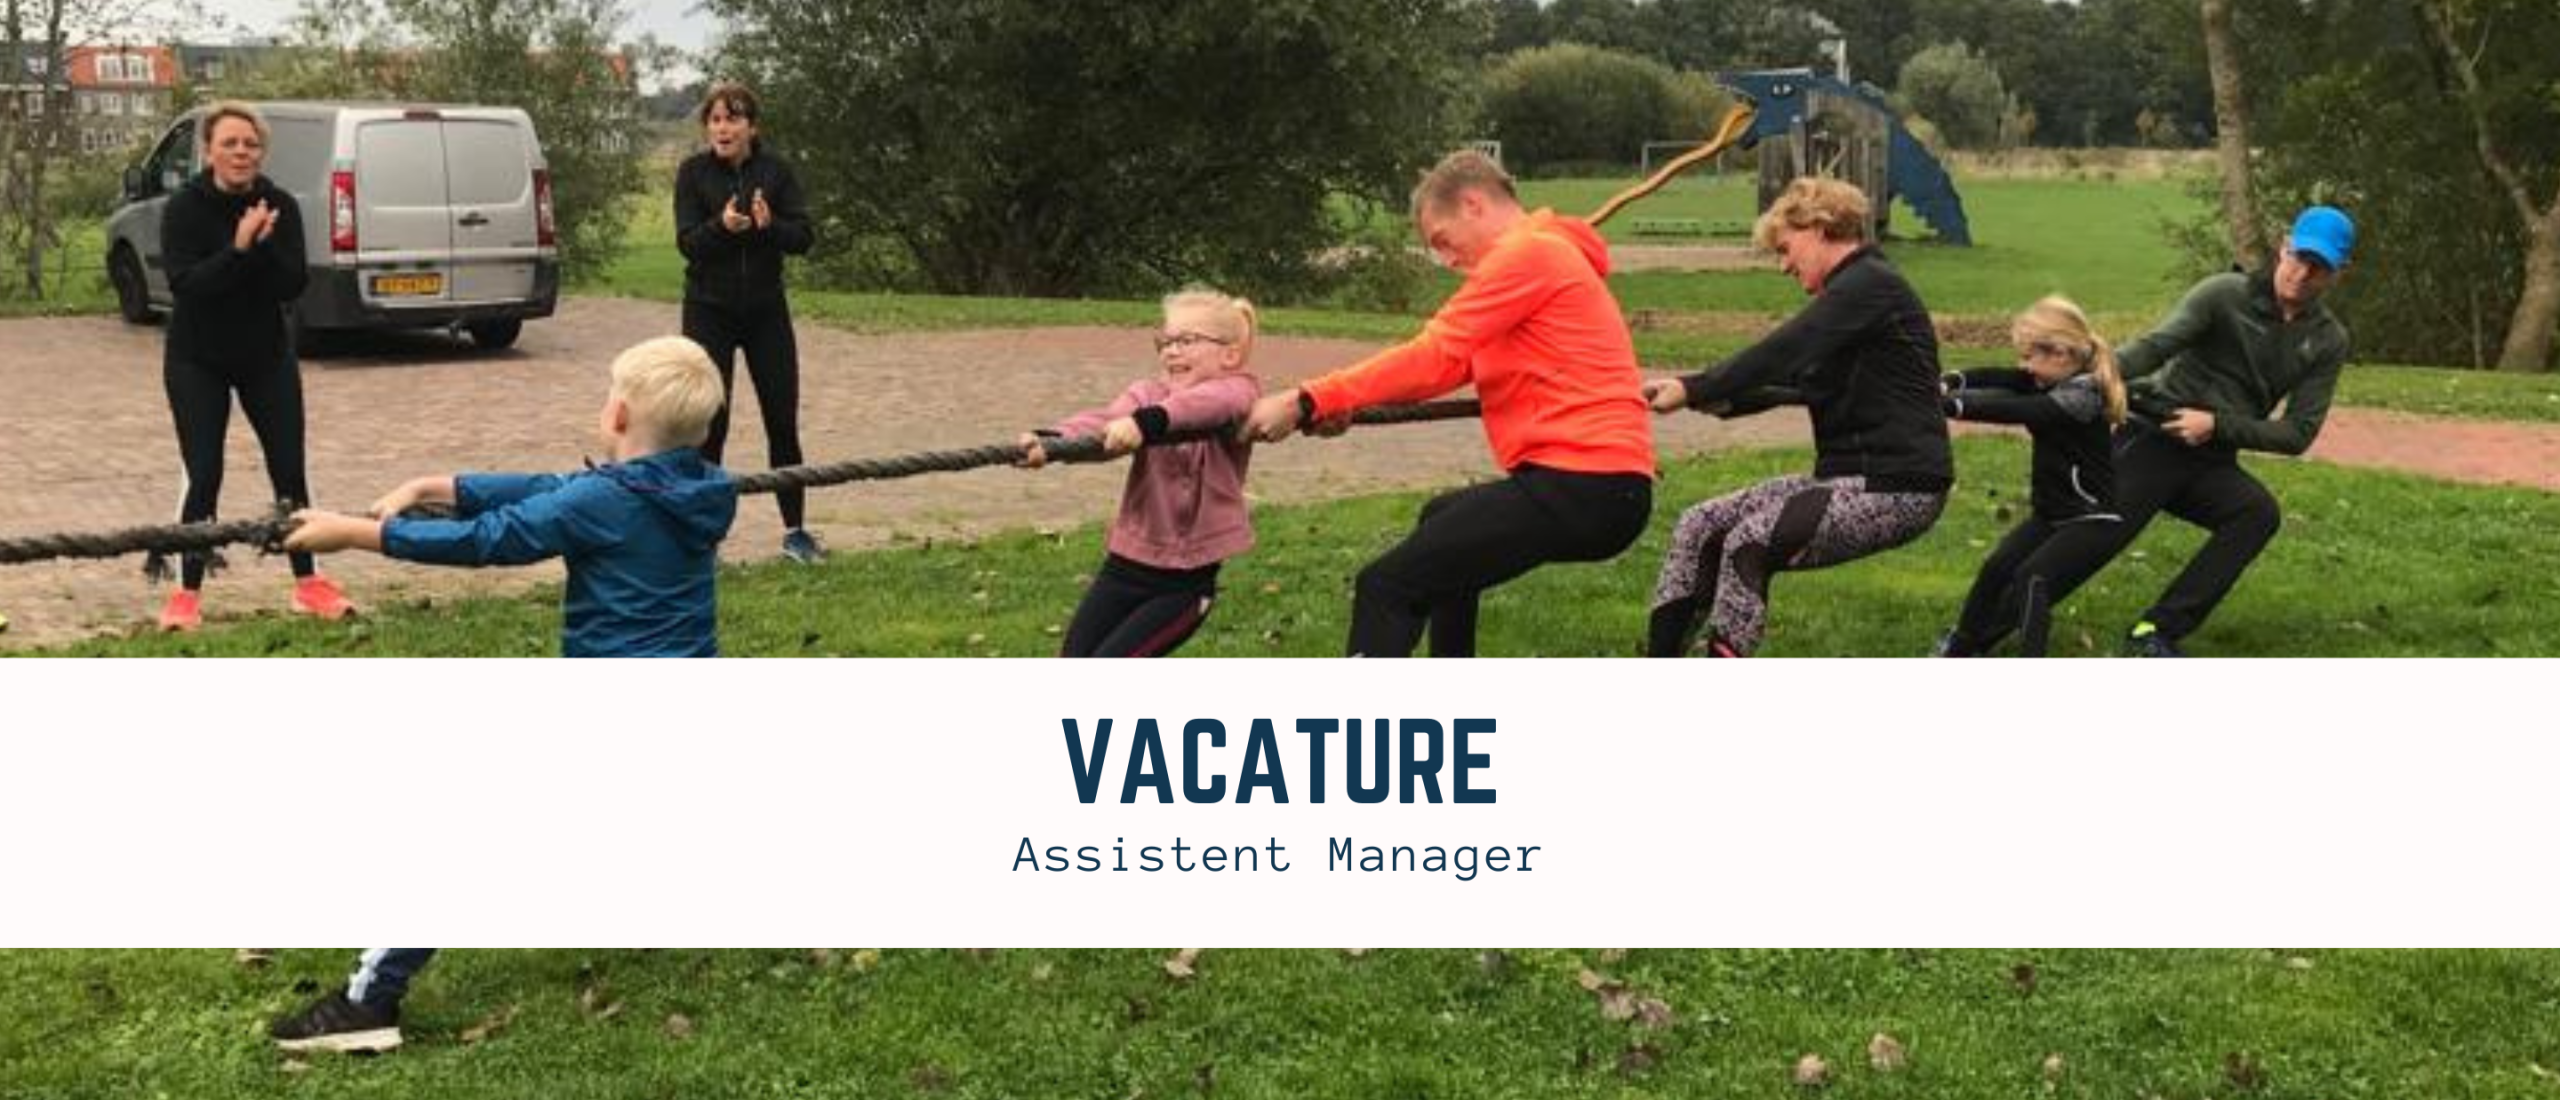 Vacature: Assistent Manager